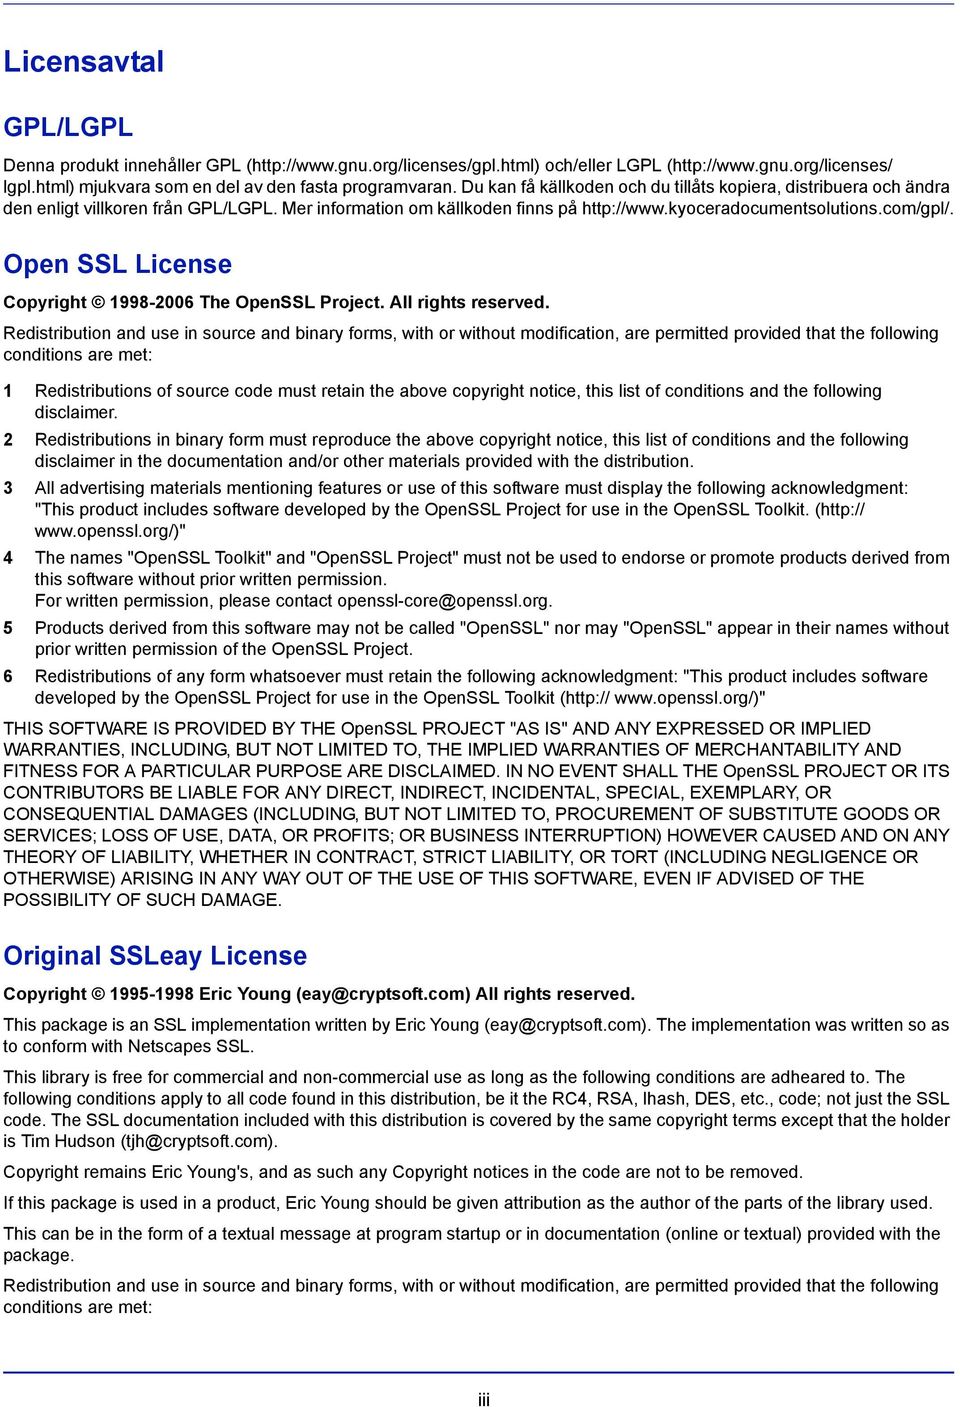 Open SSL License Copyright 1998-2006 The OpenSSL Project. All rights reserved.